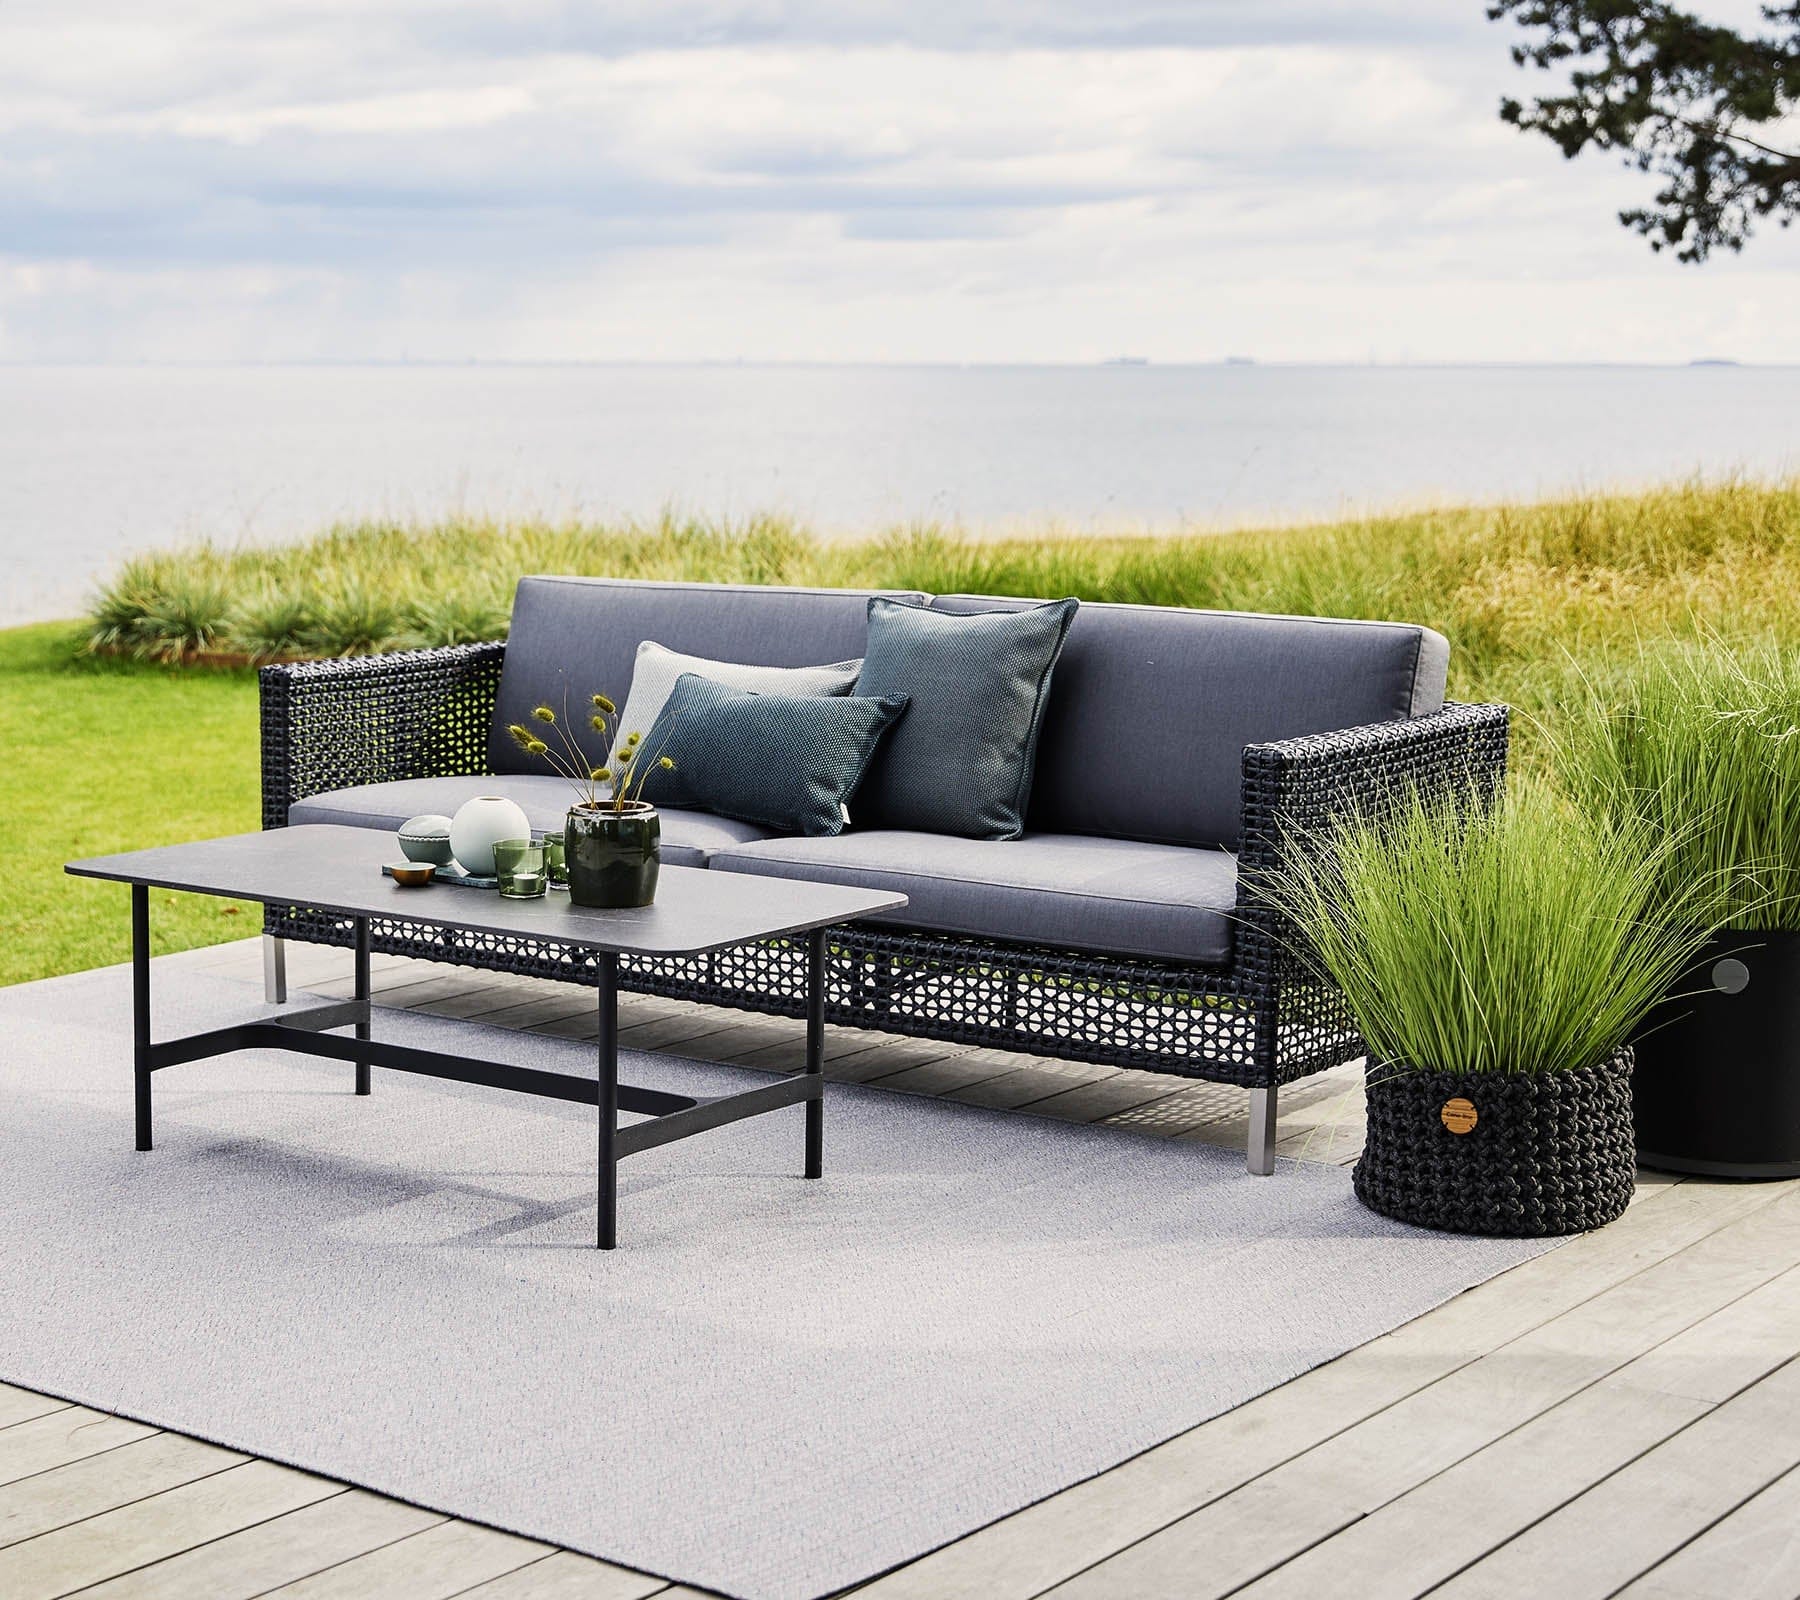 Boxhill's Connect 3-Seater Weave Sofa Graphite lifestyle image on wooden platform at the garden